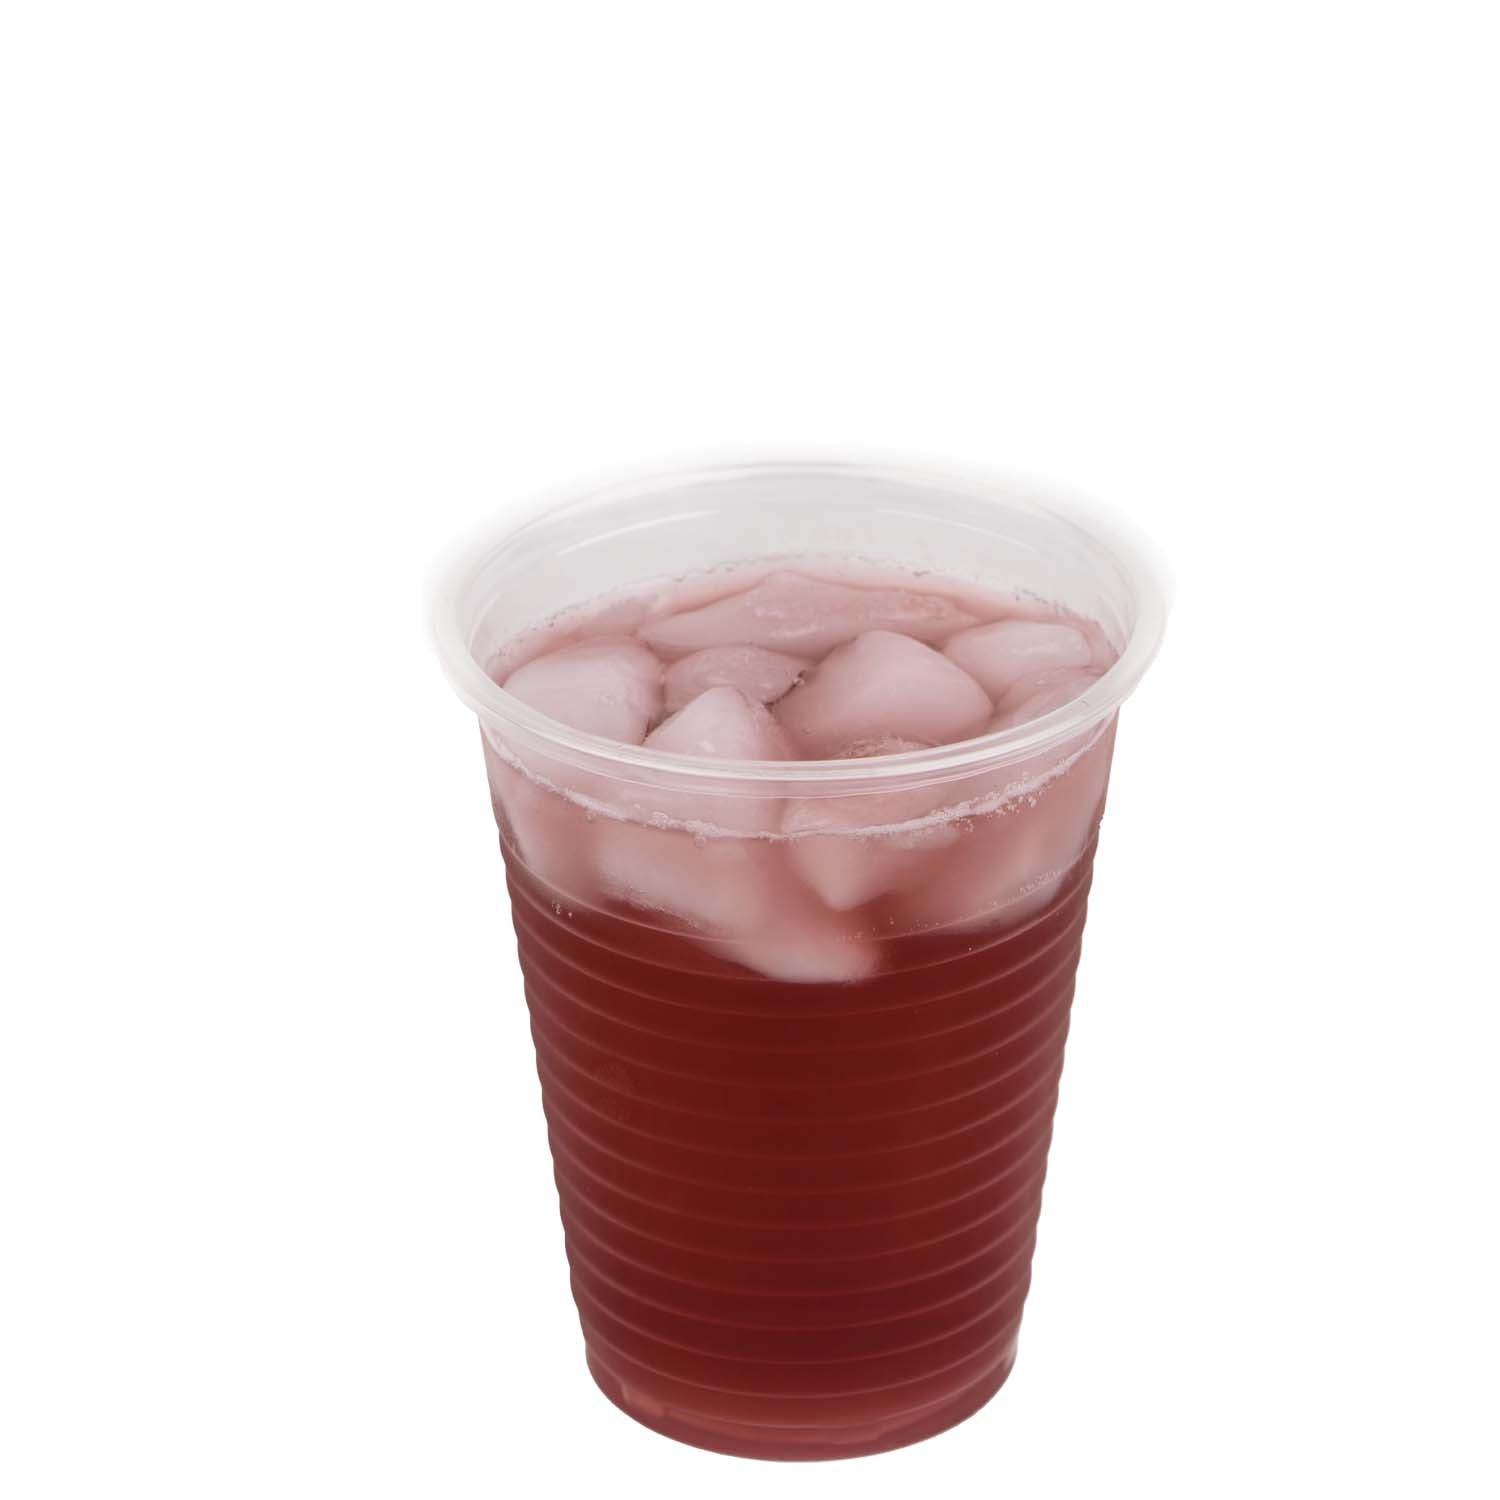 7 Ounces  BBQ Cups  Clear Cups  Party Cups  Cold Drink Cups  Soda Plastic Cups  Translucent Plastic Cups  Translucent Cups  translucent  Plastic Cups  disposable plastic cups  Clear Plastic Cups  7 oz